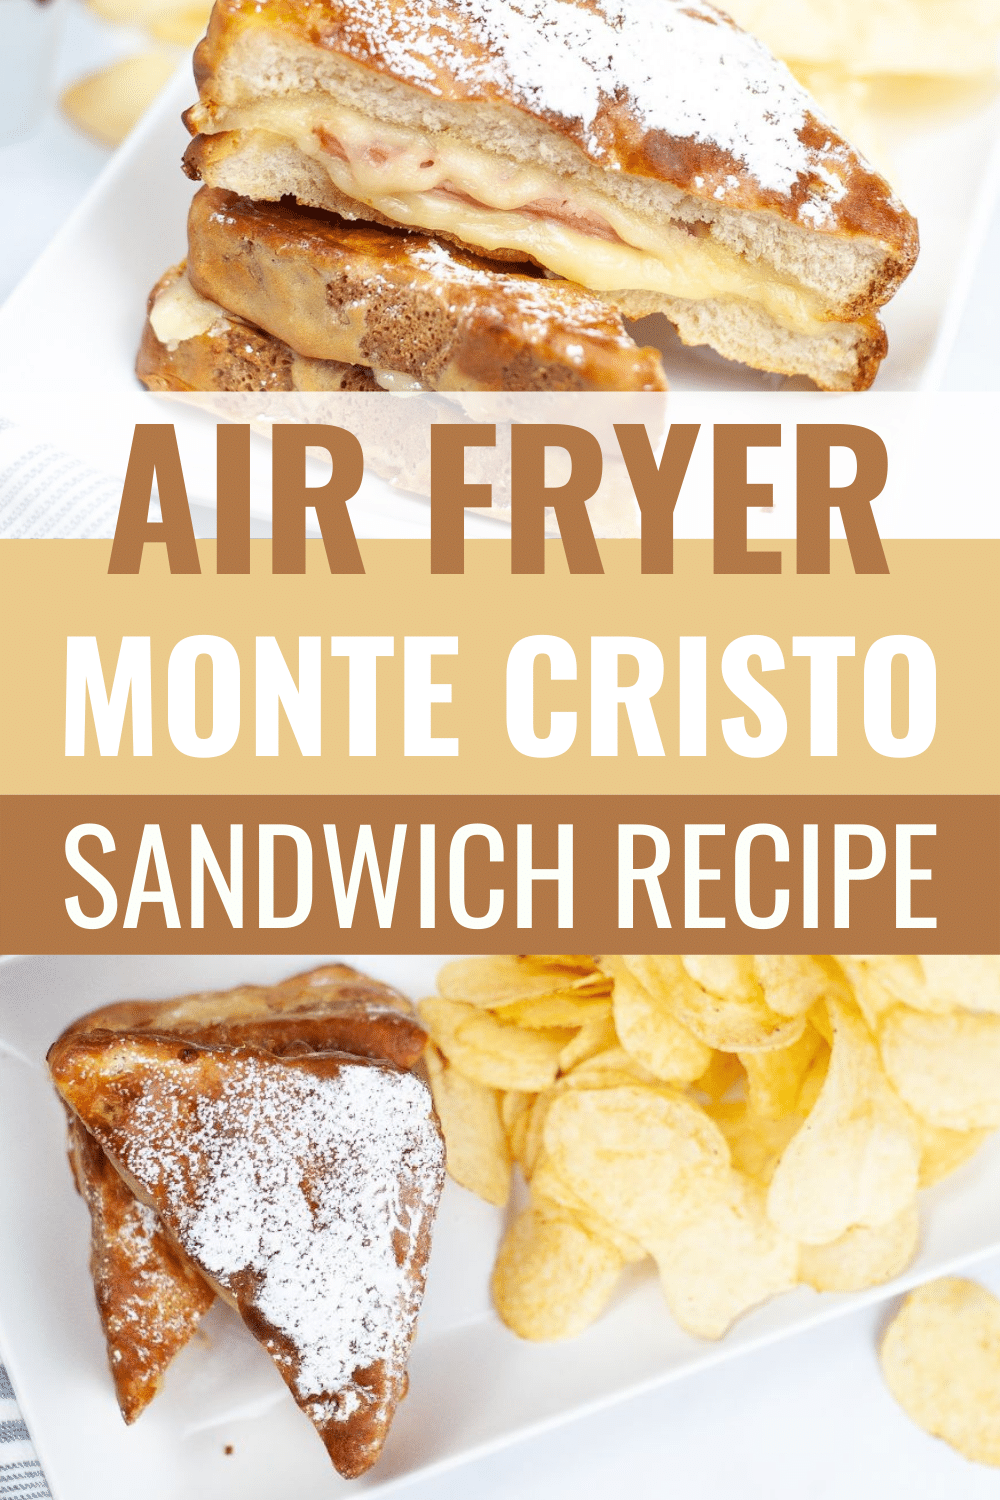 Air Fryer Monte Cristo sandwiches are crispy battered sandwiches filled with ham and melty swiss cheese. This homemade sandwich is delicious! #airfryer #montecristo #sandwich #recipe #hamandcheese via @wondermomwannab